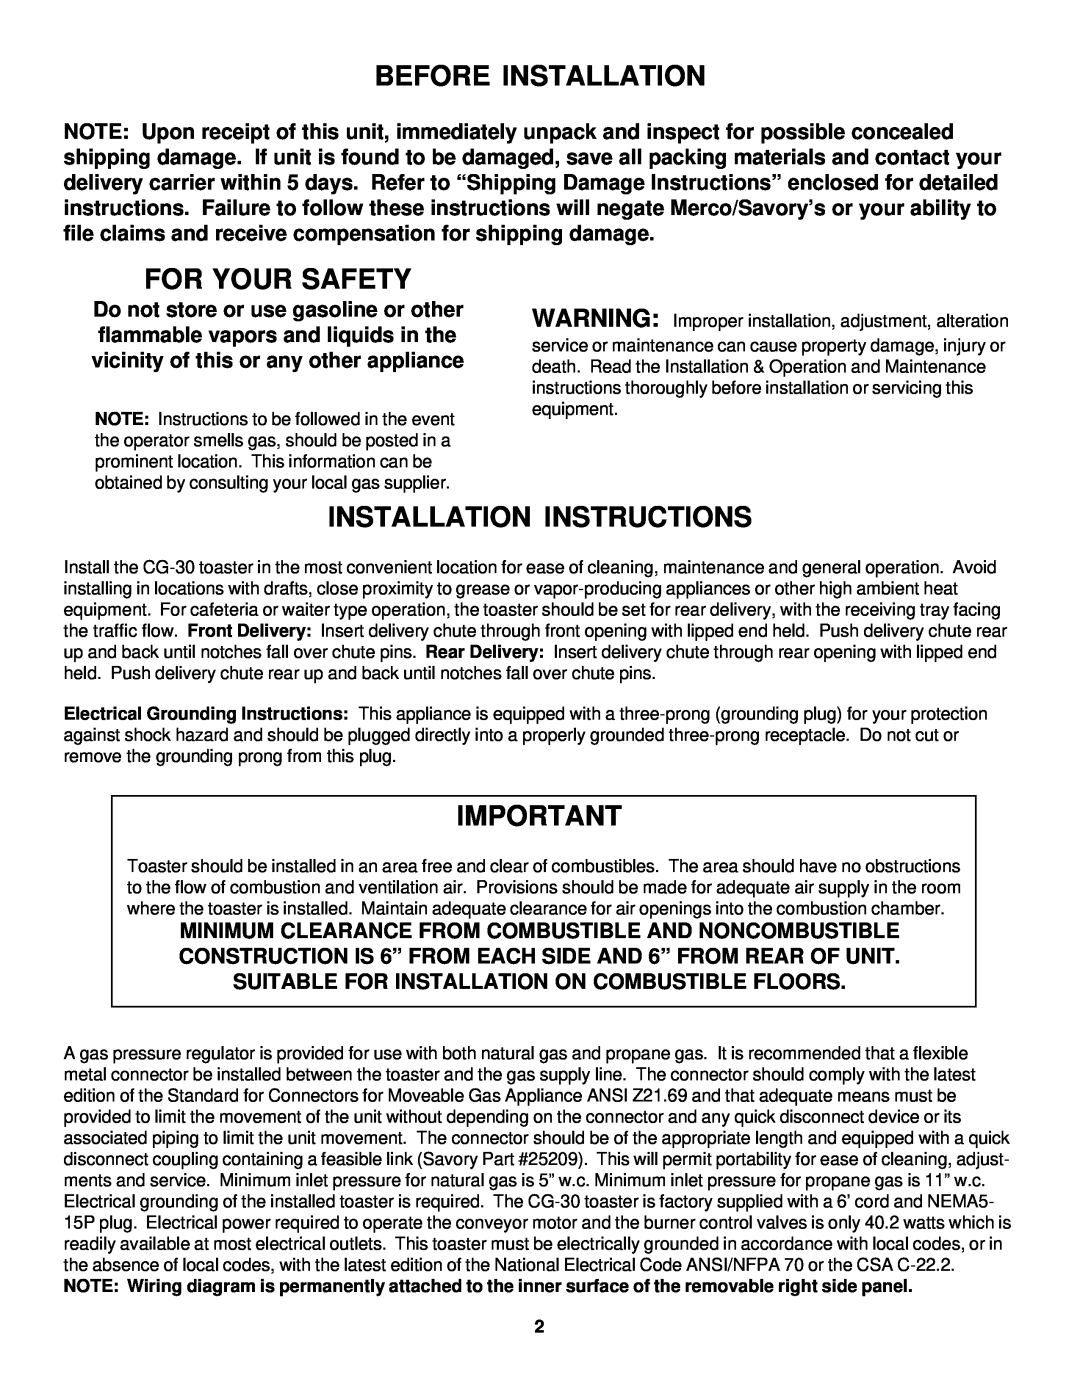 Merco Savory CG-30 operation manual Before Installation, For Your Safety, Installation Instructions 